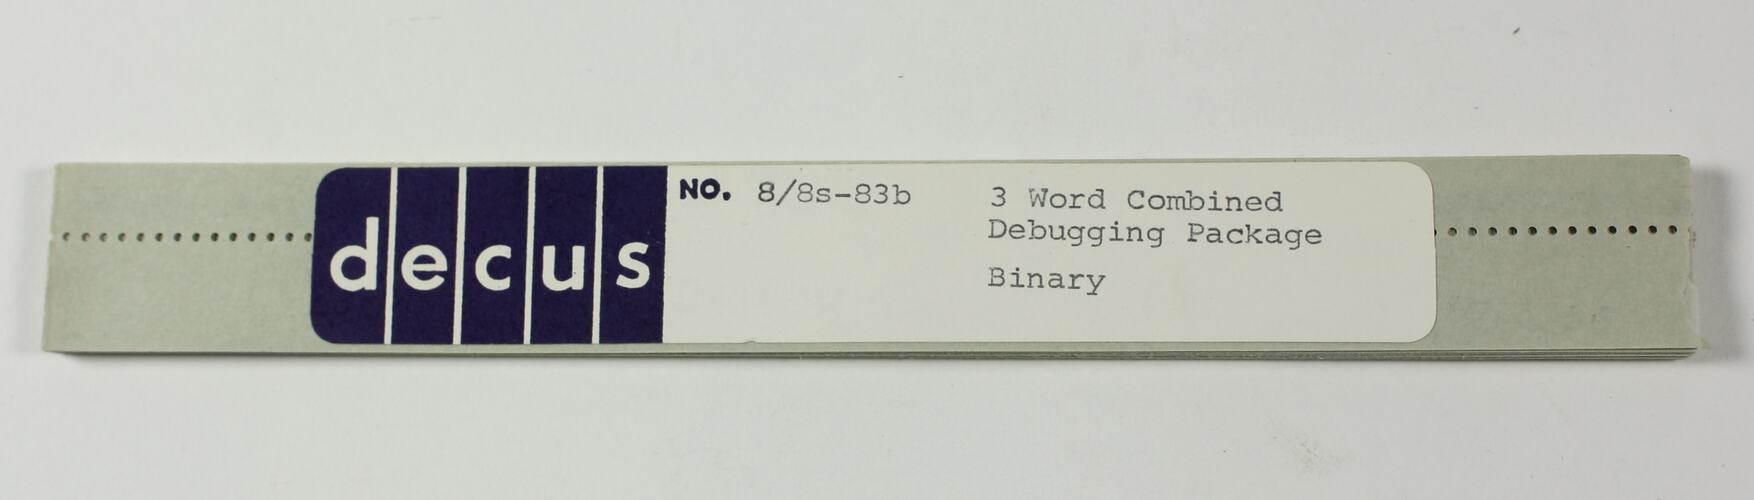 Paper Tape - DECUS, '8/8s-83b 3 Word Combined Debugging Package, Binary'